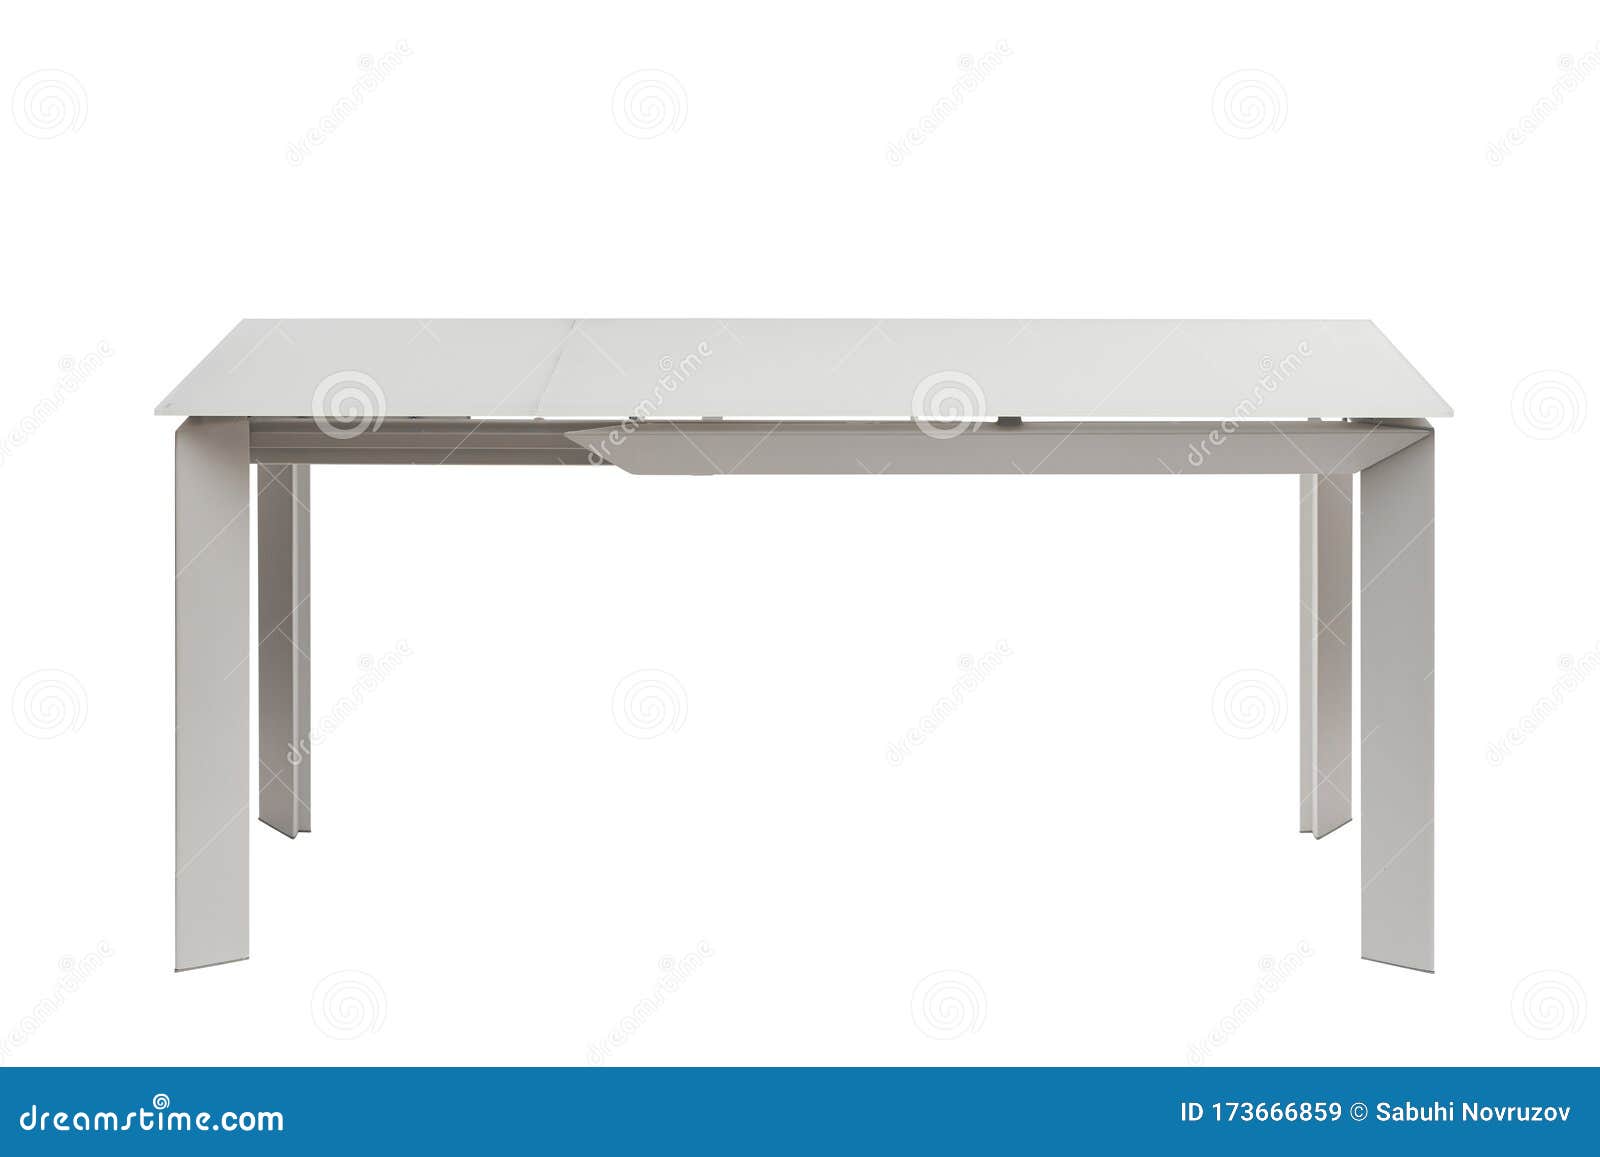 Spread Out White Iron Table With Glass Top Side View Isolated On White Background Modern White Glass Table For Office Stock Image Image Of House Indoors 173666859